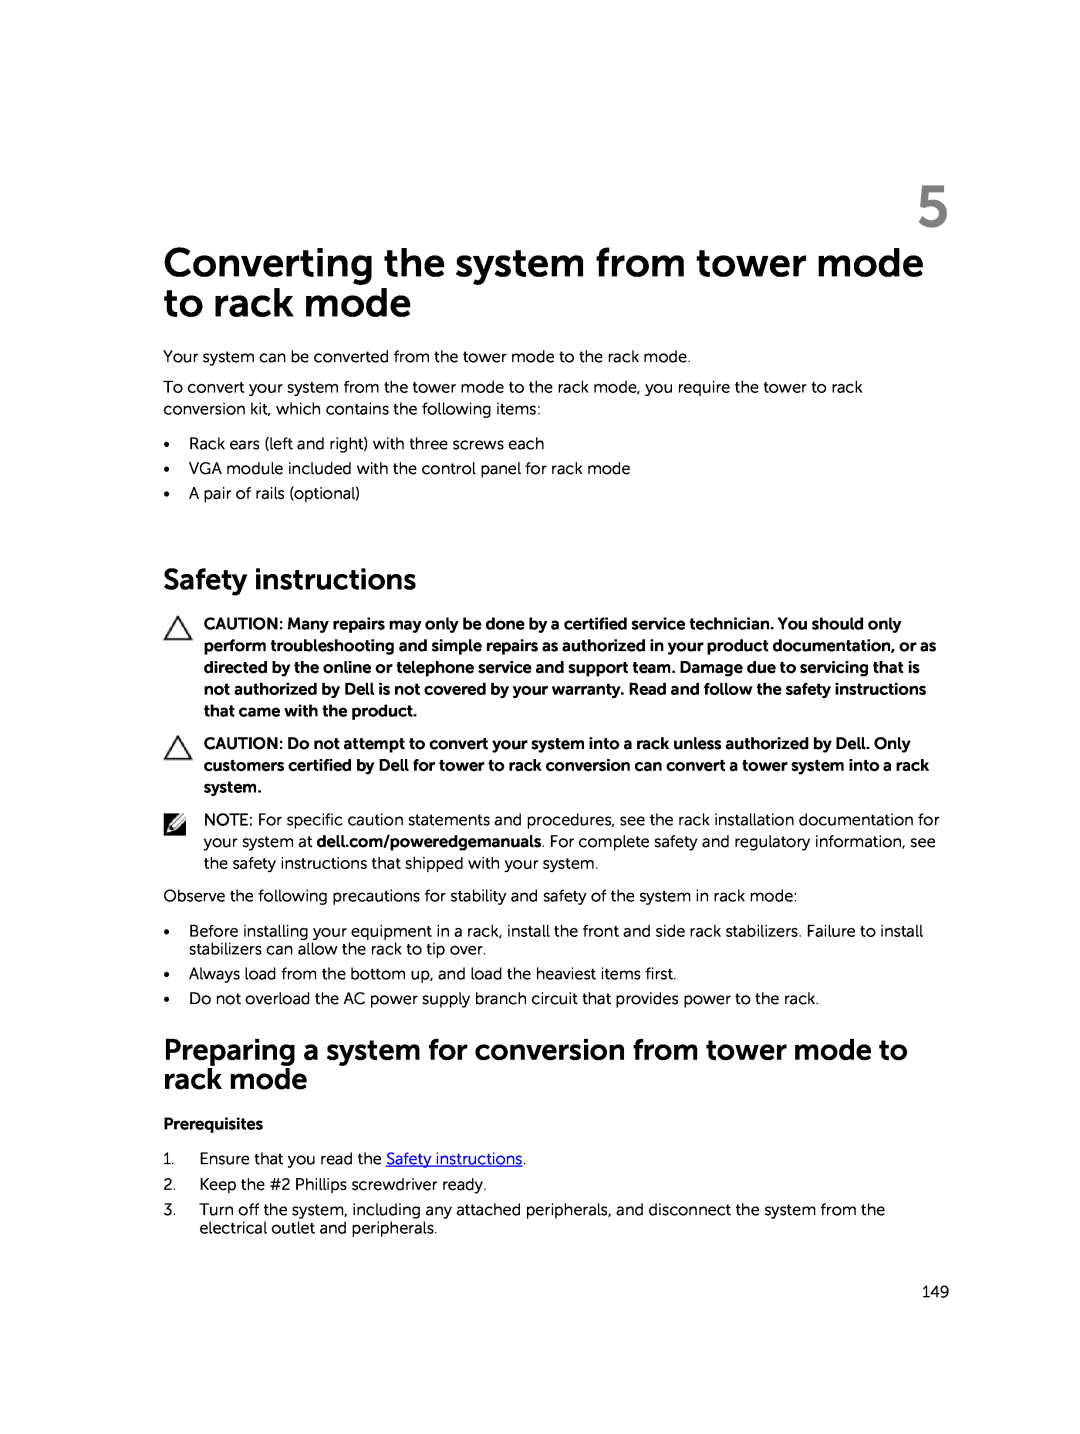 Dell E30S owner manual Converting the system from tower mode to rack mode, Safety instructions 